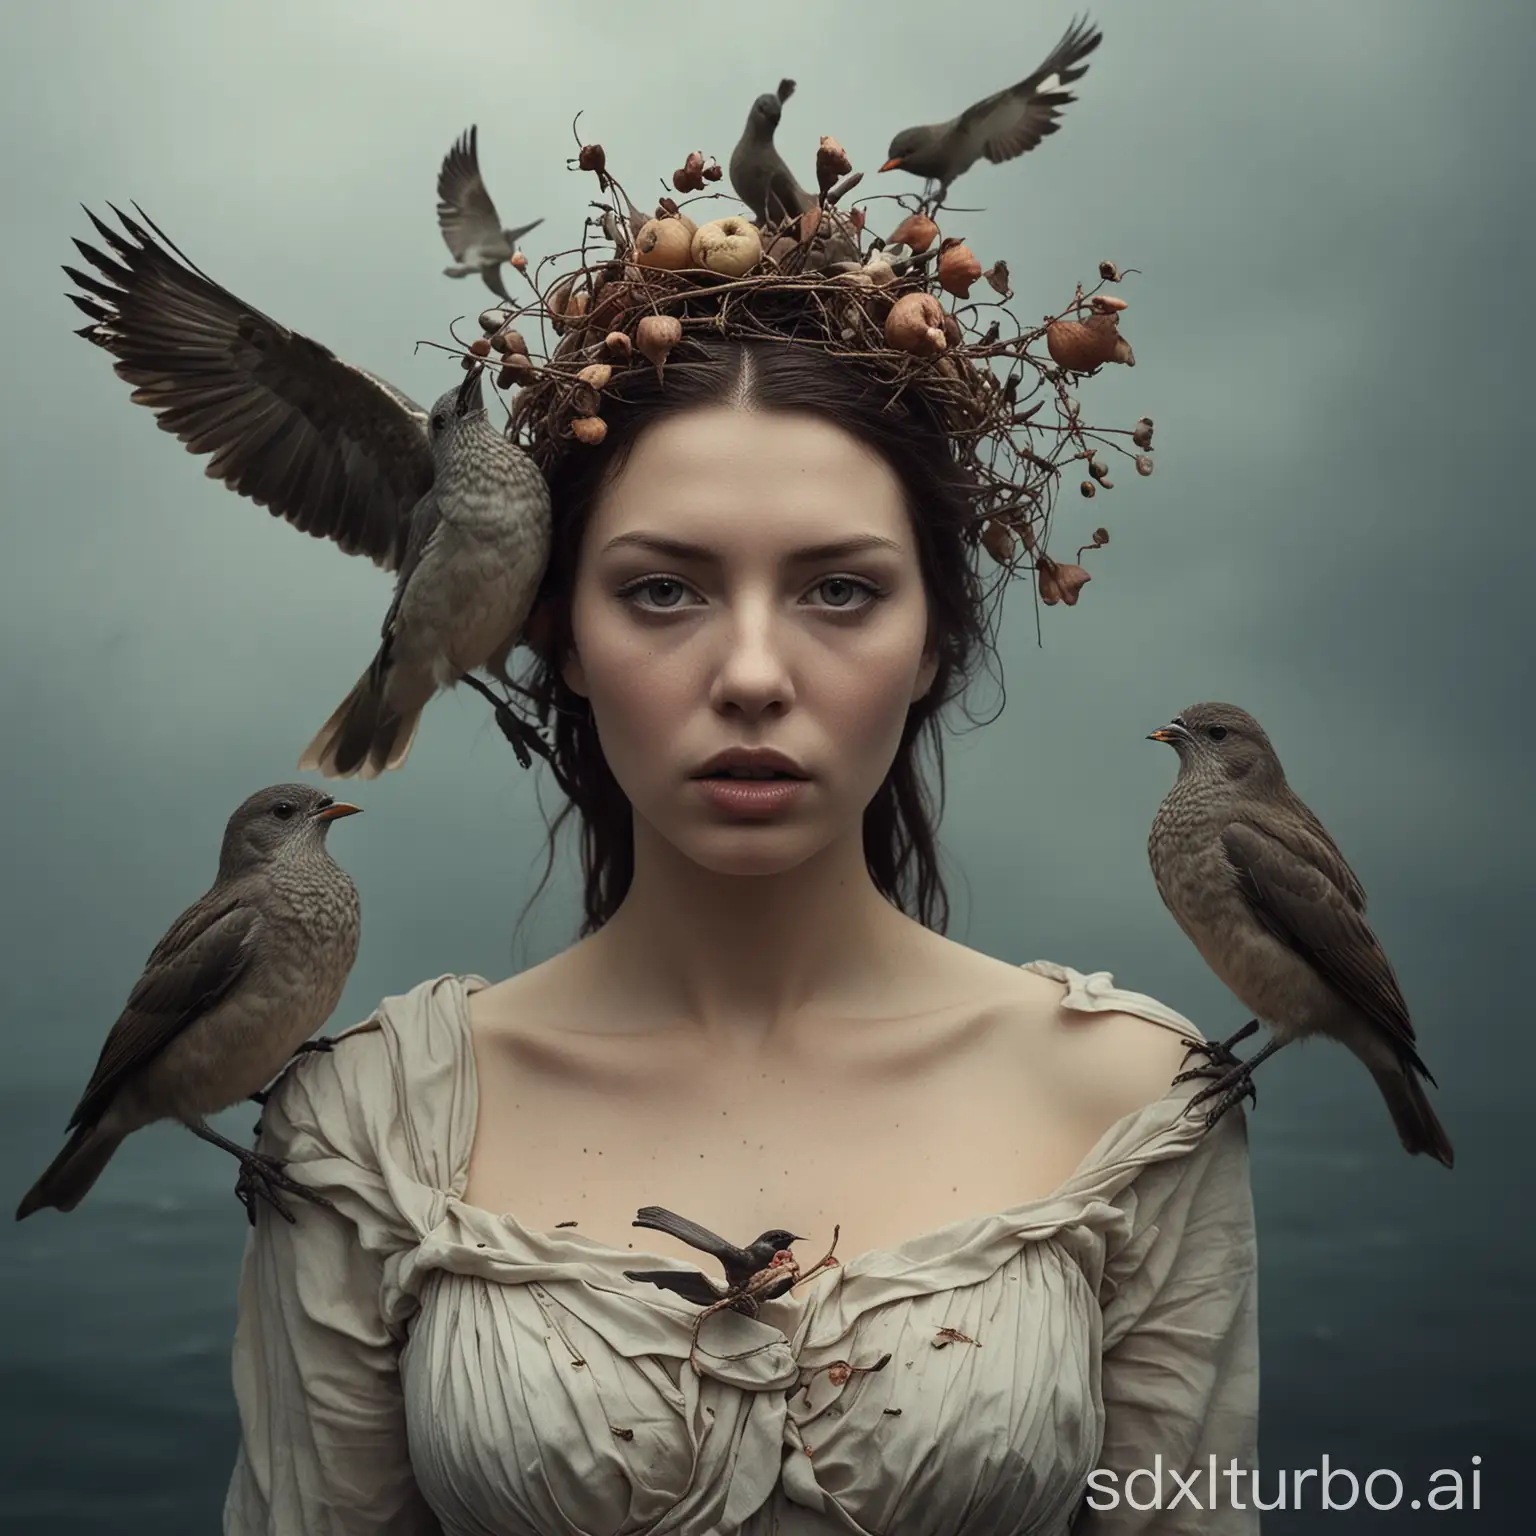 Sirens, these creatures, often depicted as a blend of woman and bird, embody the perilous allure of the unknown, photography